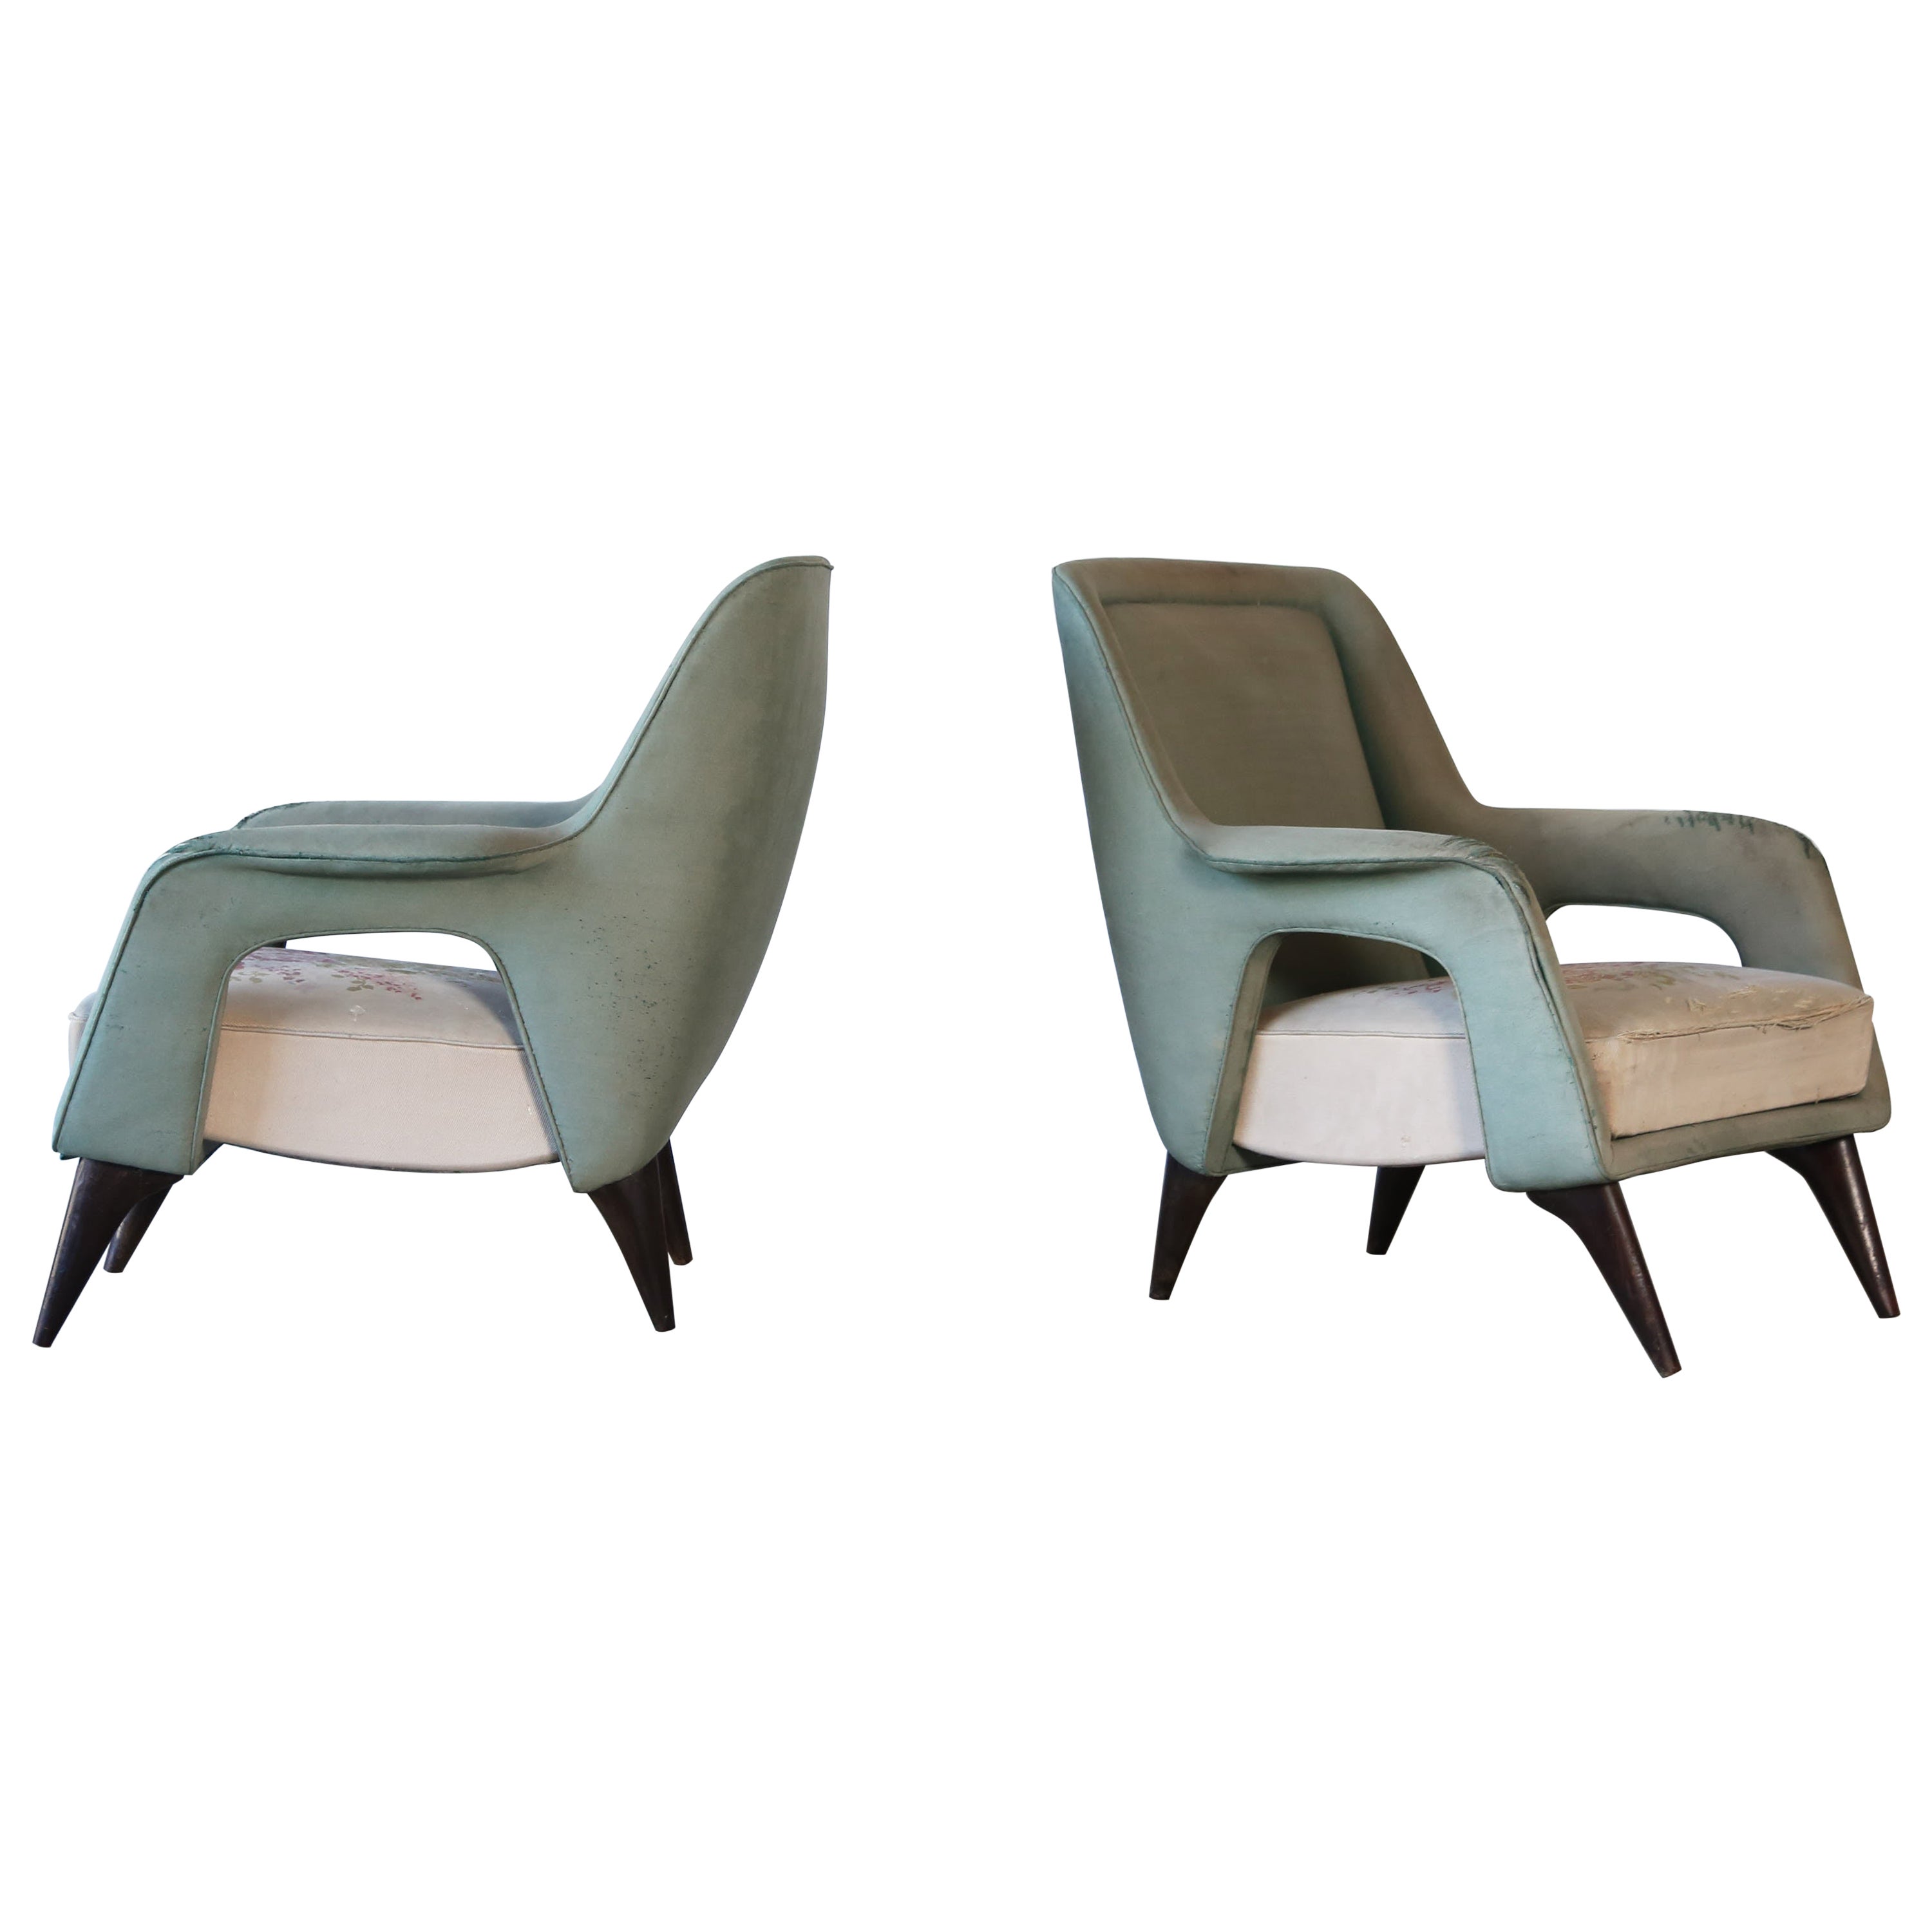 Outstanding, Rare Lounge Chairs, Italy, 1950s, For Reupholstery